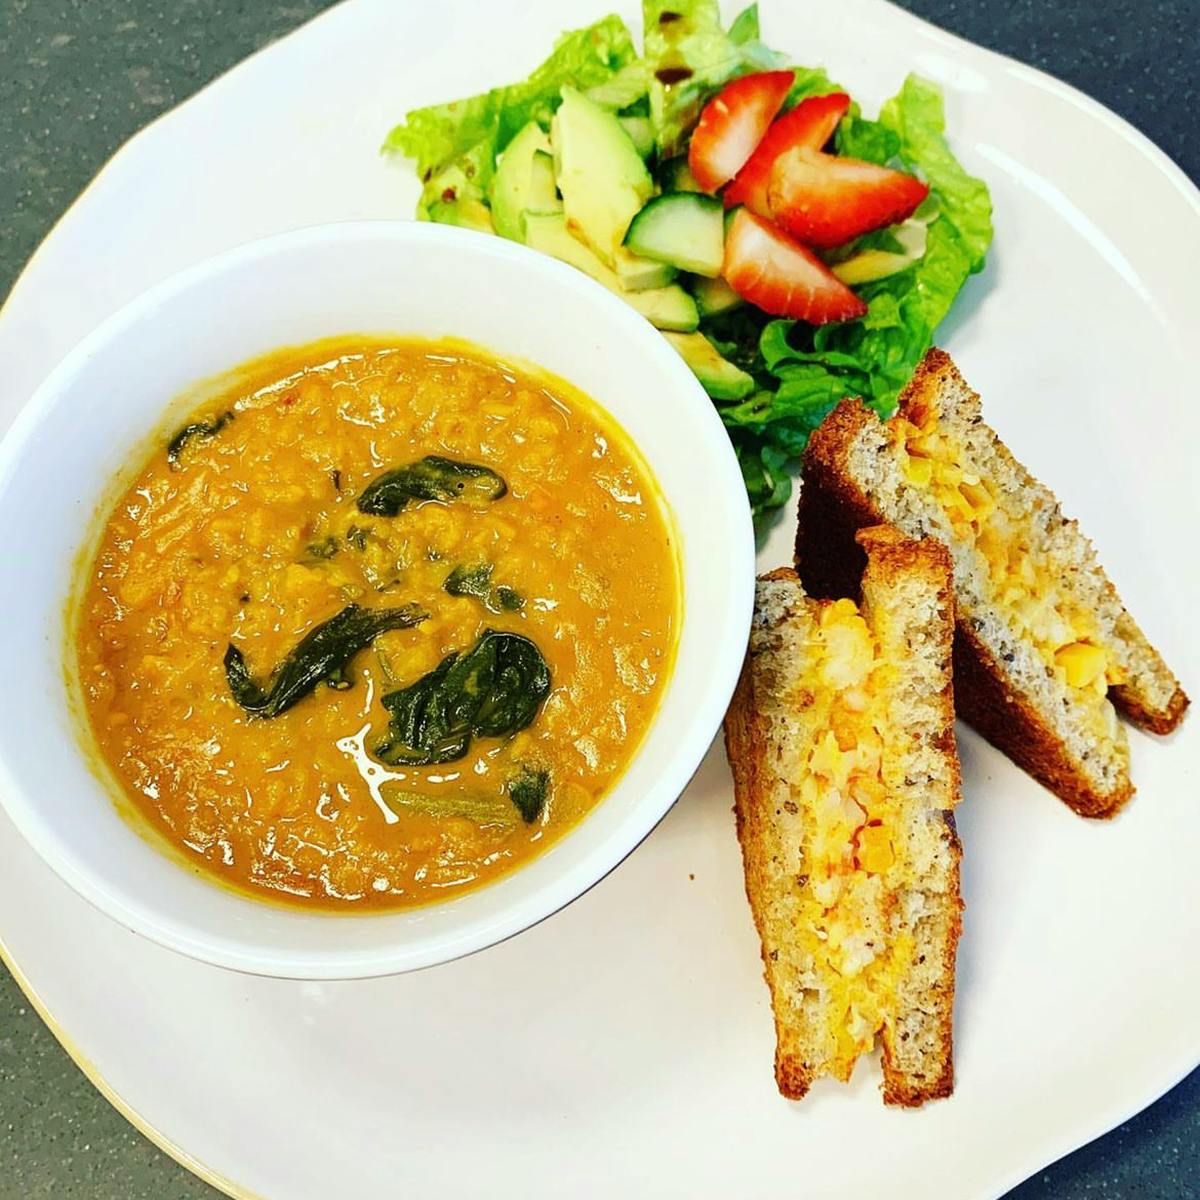 Red lentil soup in a bowl on a plate with a sandwich and salad